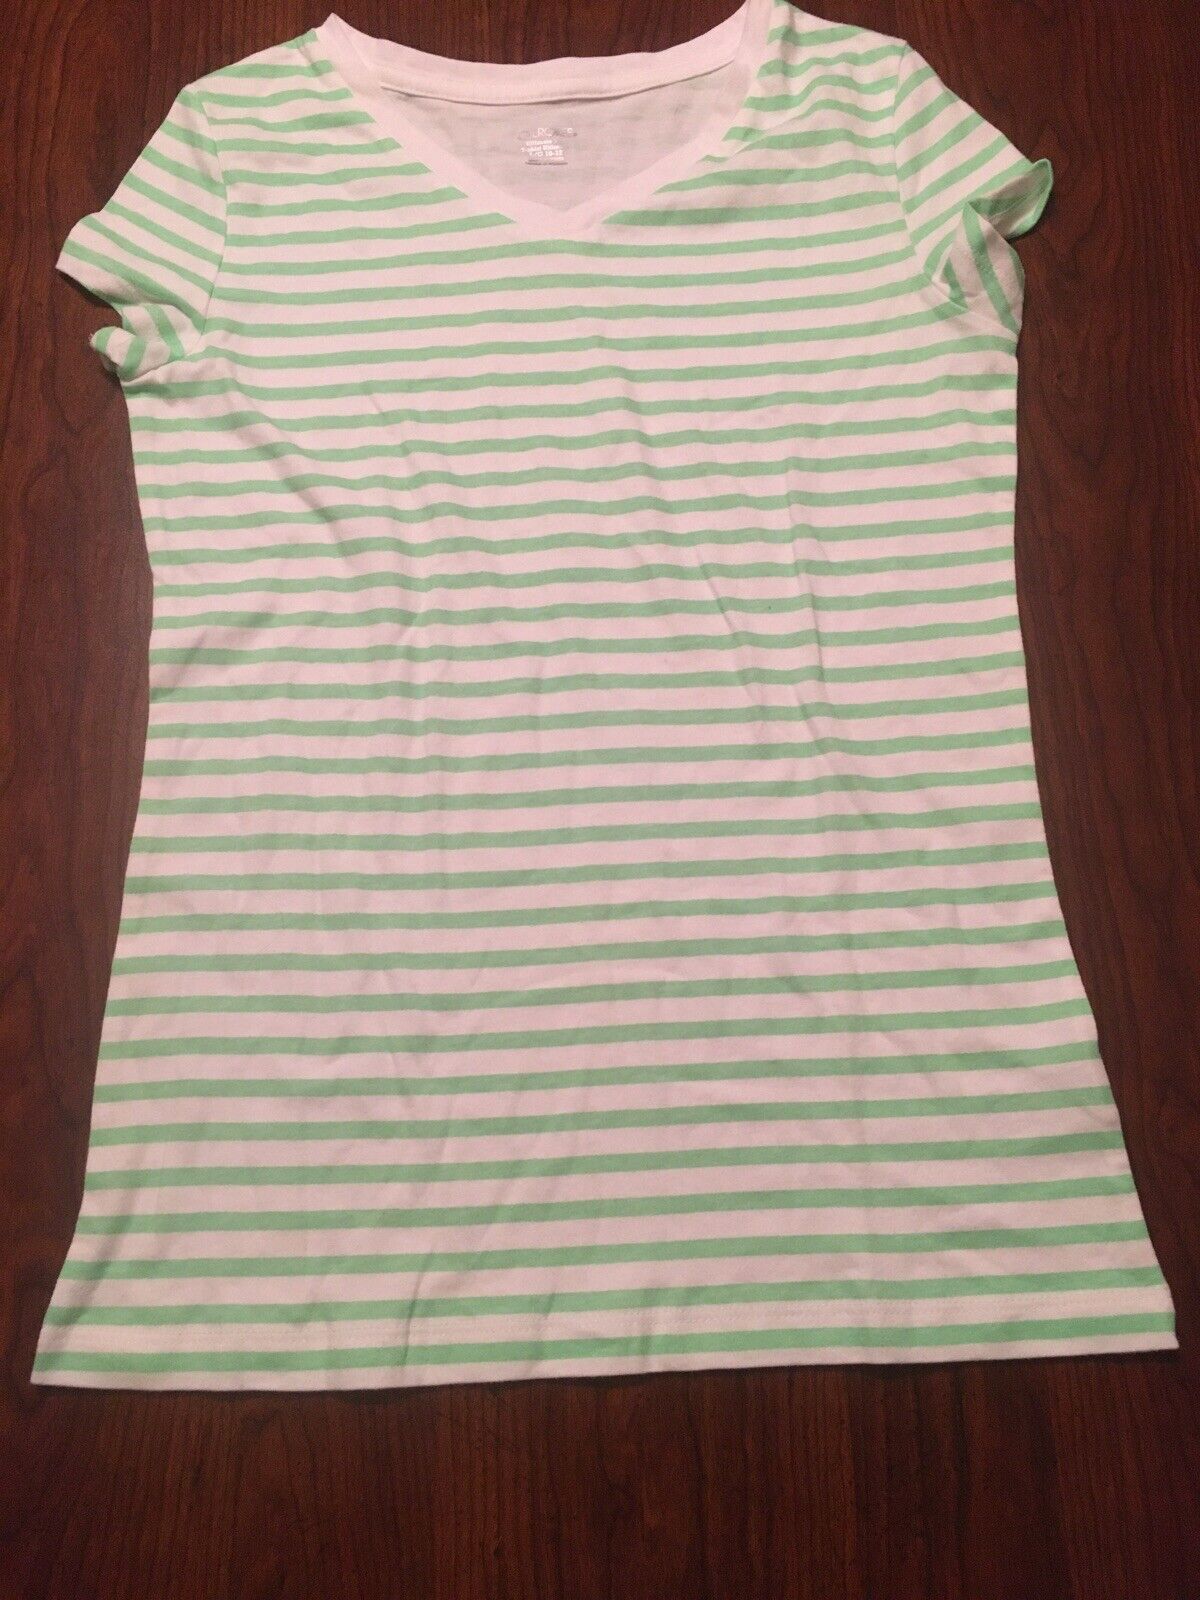 Girls Cherokee  Ultimate Tee T-shirt Size L Large Green & White Striped Cotton